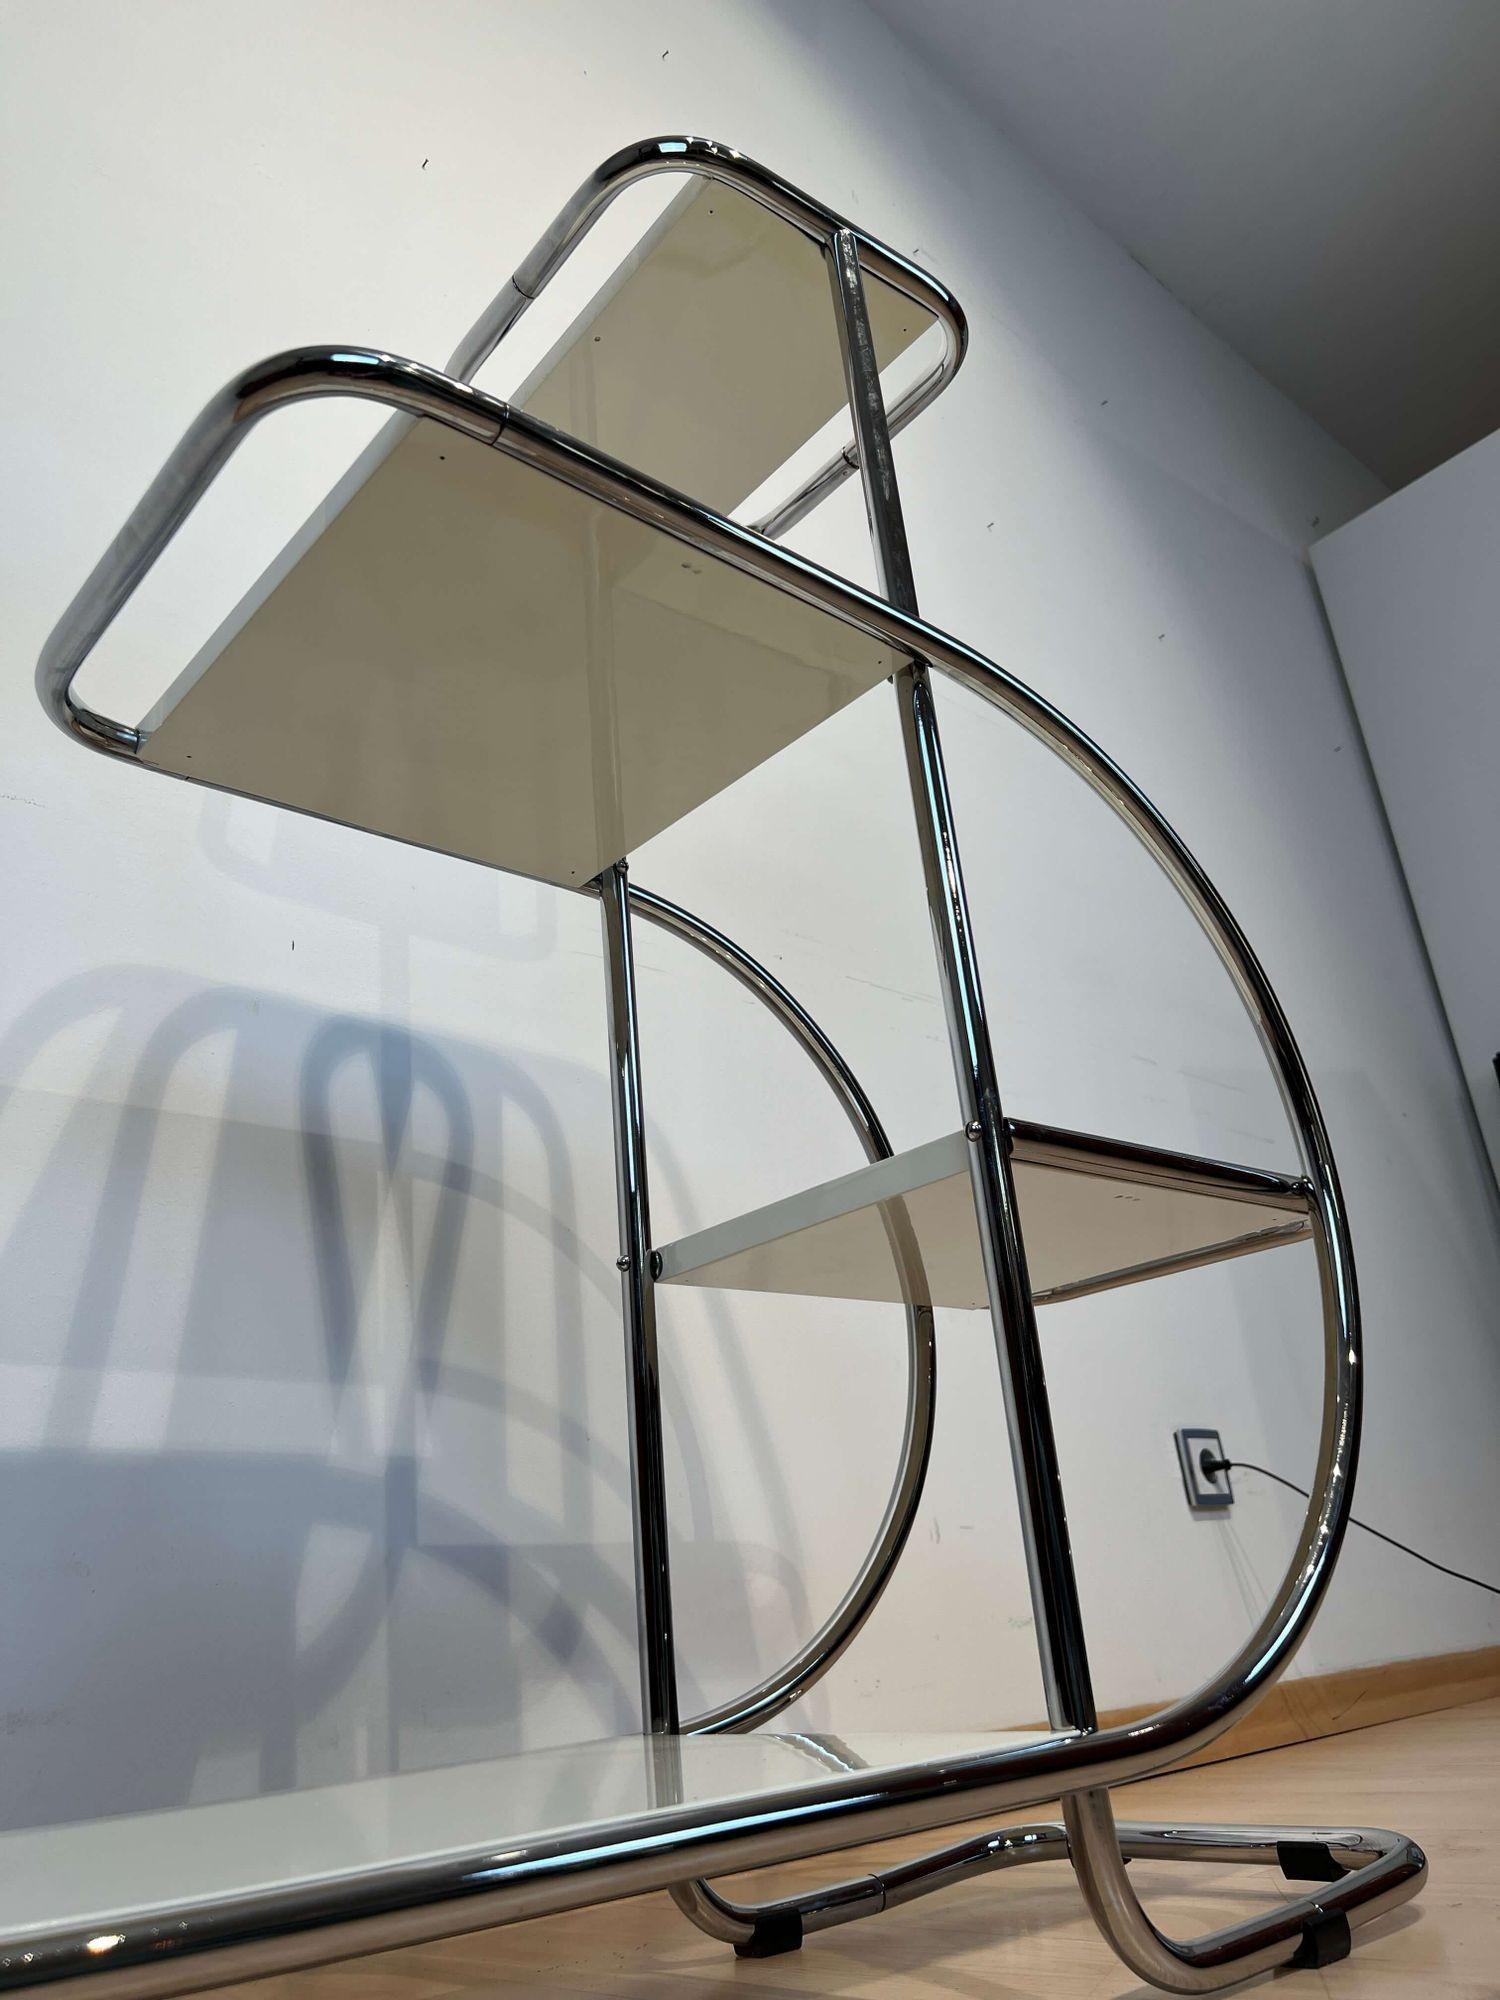 Bauhaus Steeltube Etagere, Creme-White Lacquer, Nickel Plate, Germany, 1930s For Sale 10